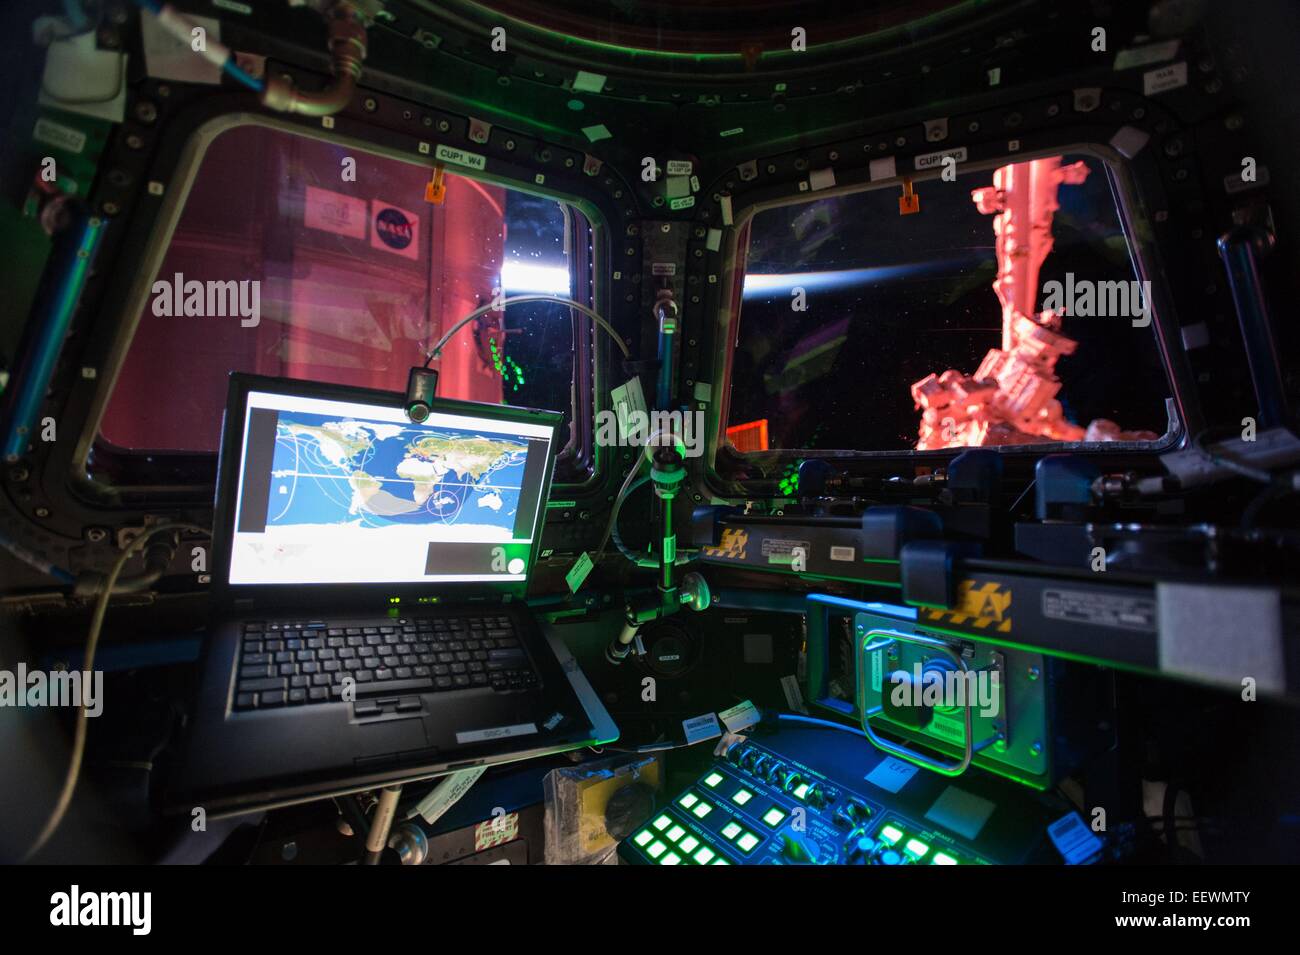 Interior view from the International Space Station Cupola module January 4, 2015 in Earth Orbit. The large bay windows allows the Expedition 42 crew to see outside. The Cupola houses one of the space station's two robotic work stations used by astronauts to manipulate the large robotic arm seen through the right window. The robotic arm, or Canadarm2, was used throughout the construction of the station and is still used to grapple visiting cargo vehicles and assist astronauts during spacewalks. The Cupola is attached to the nadir side of the space station. Stock Photo